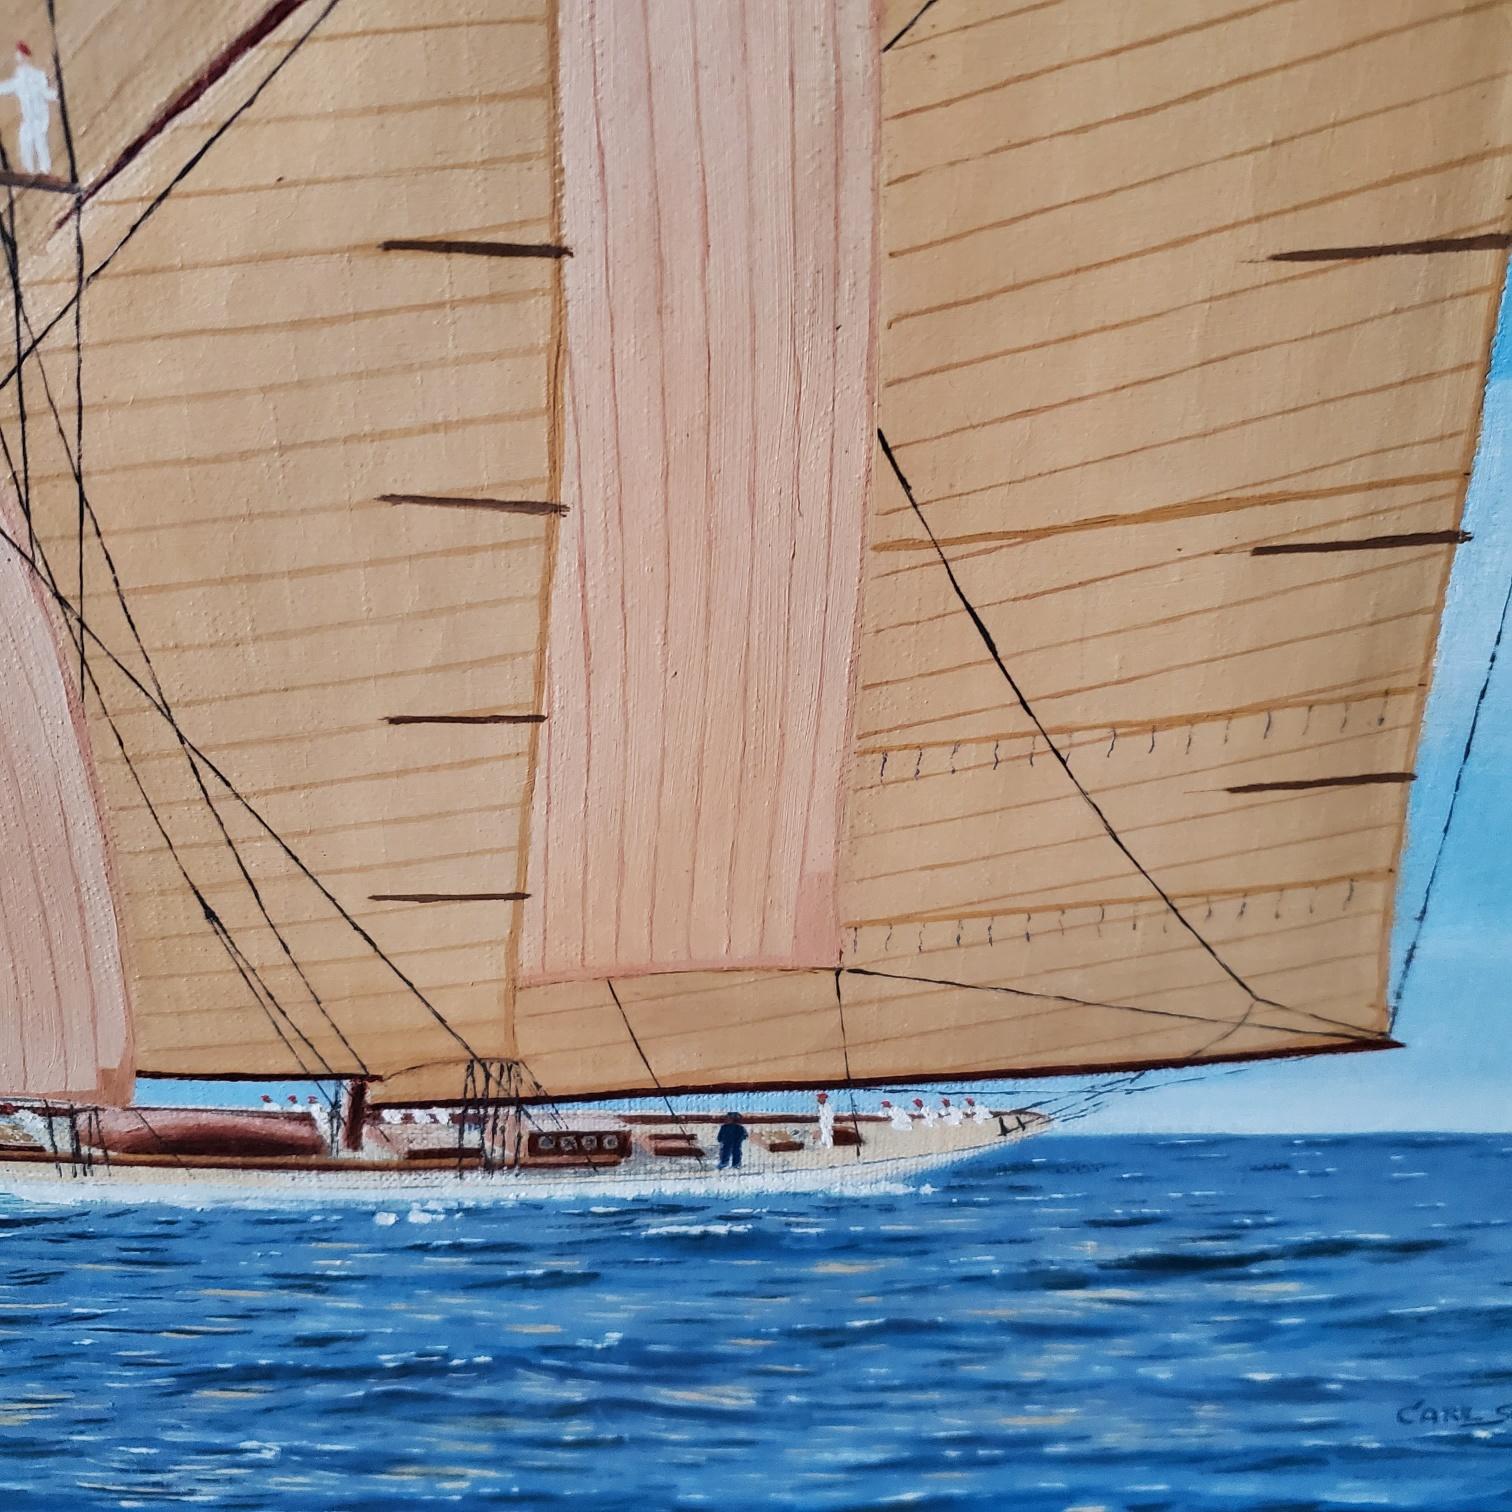 Seascape with Portrait of a Schooner-Rigged Yacht, Signed and Dated 1937 In Good Condition For Sale In Nantucket, MA